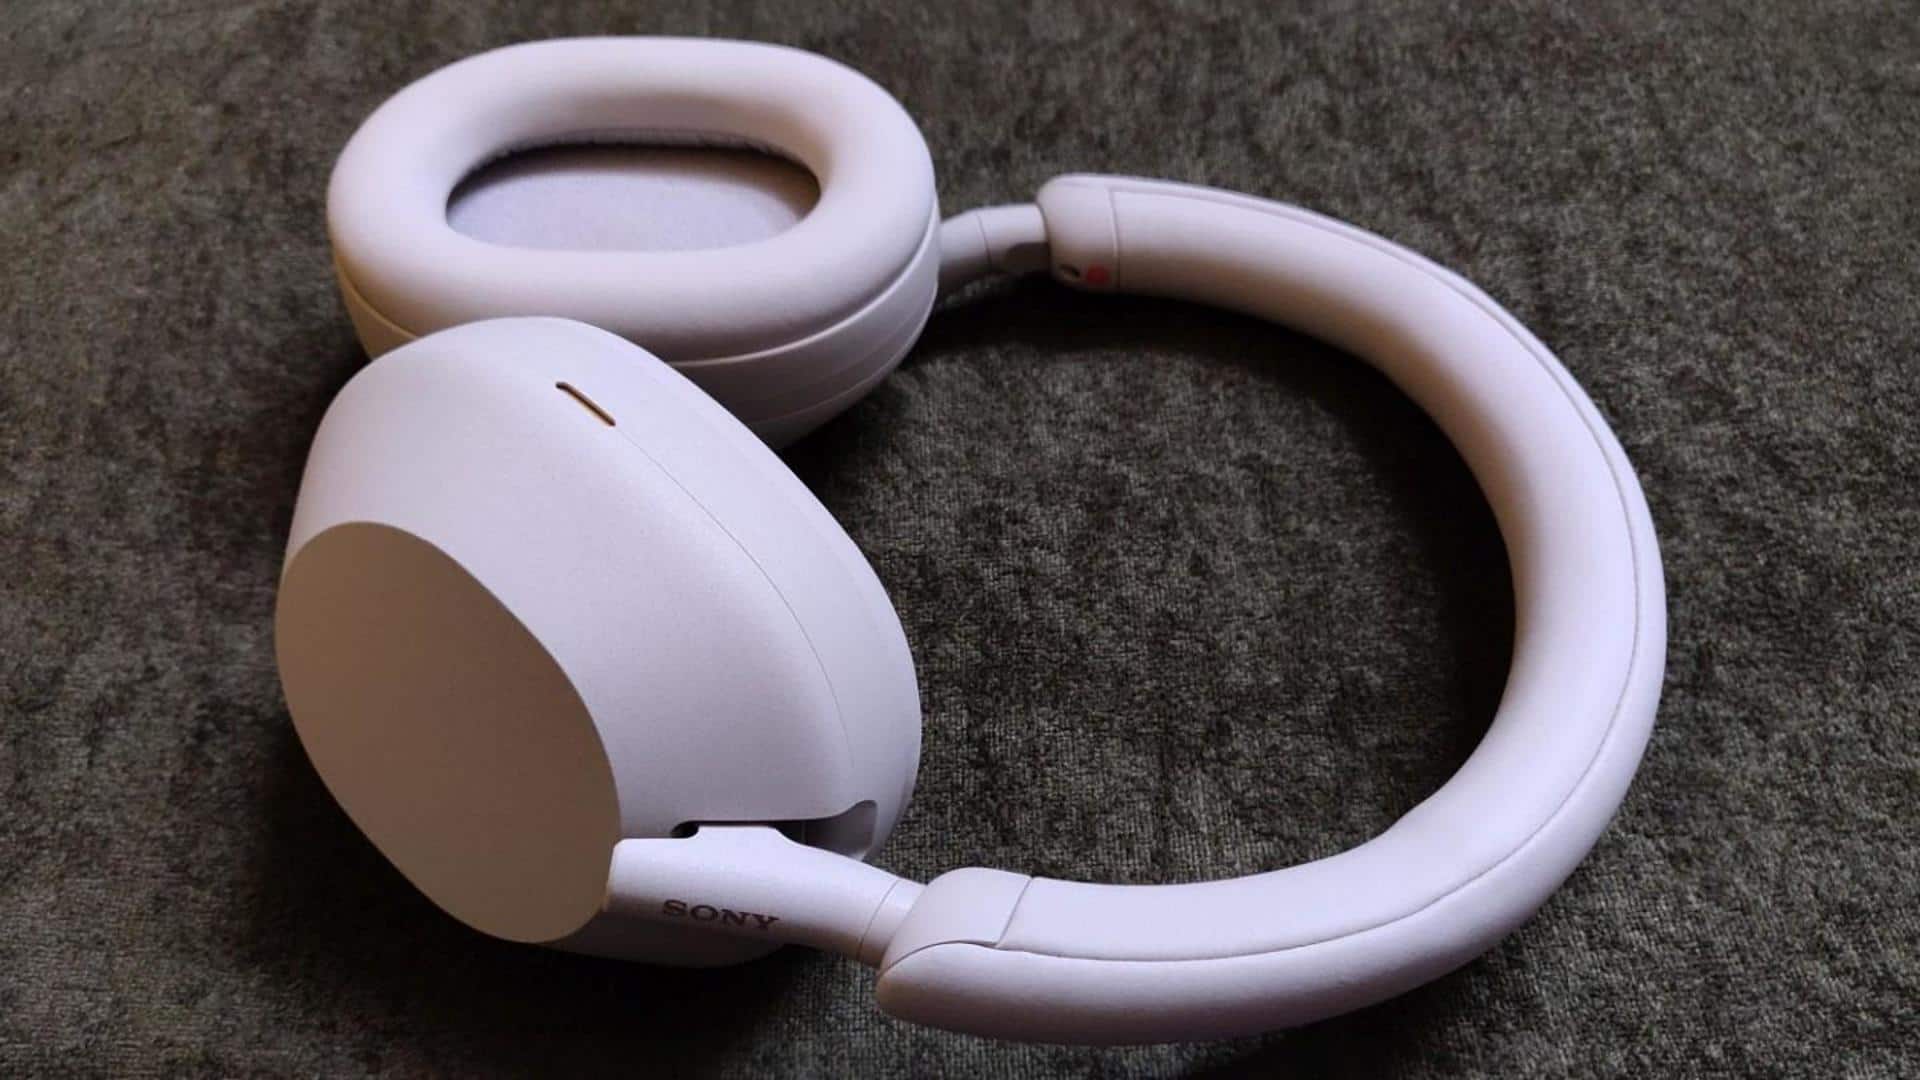 Sony WH-1000XM5 headphones review: Arguably the best under Rs. 30,000